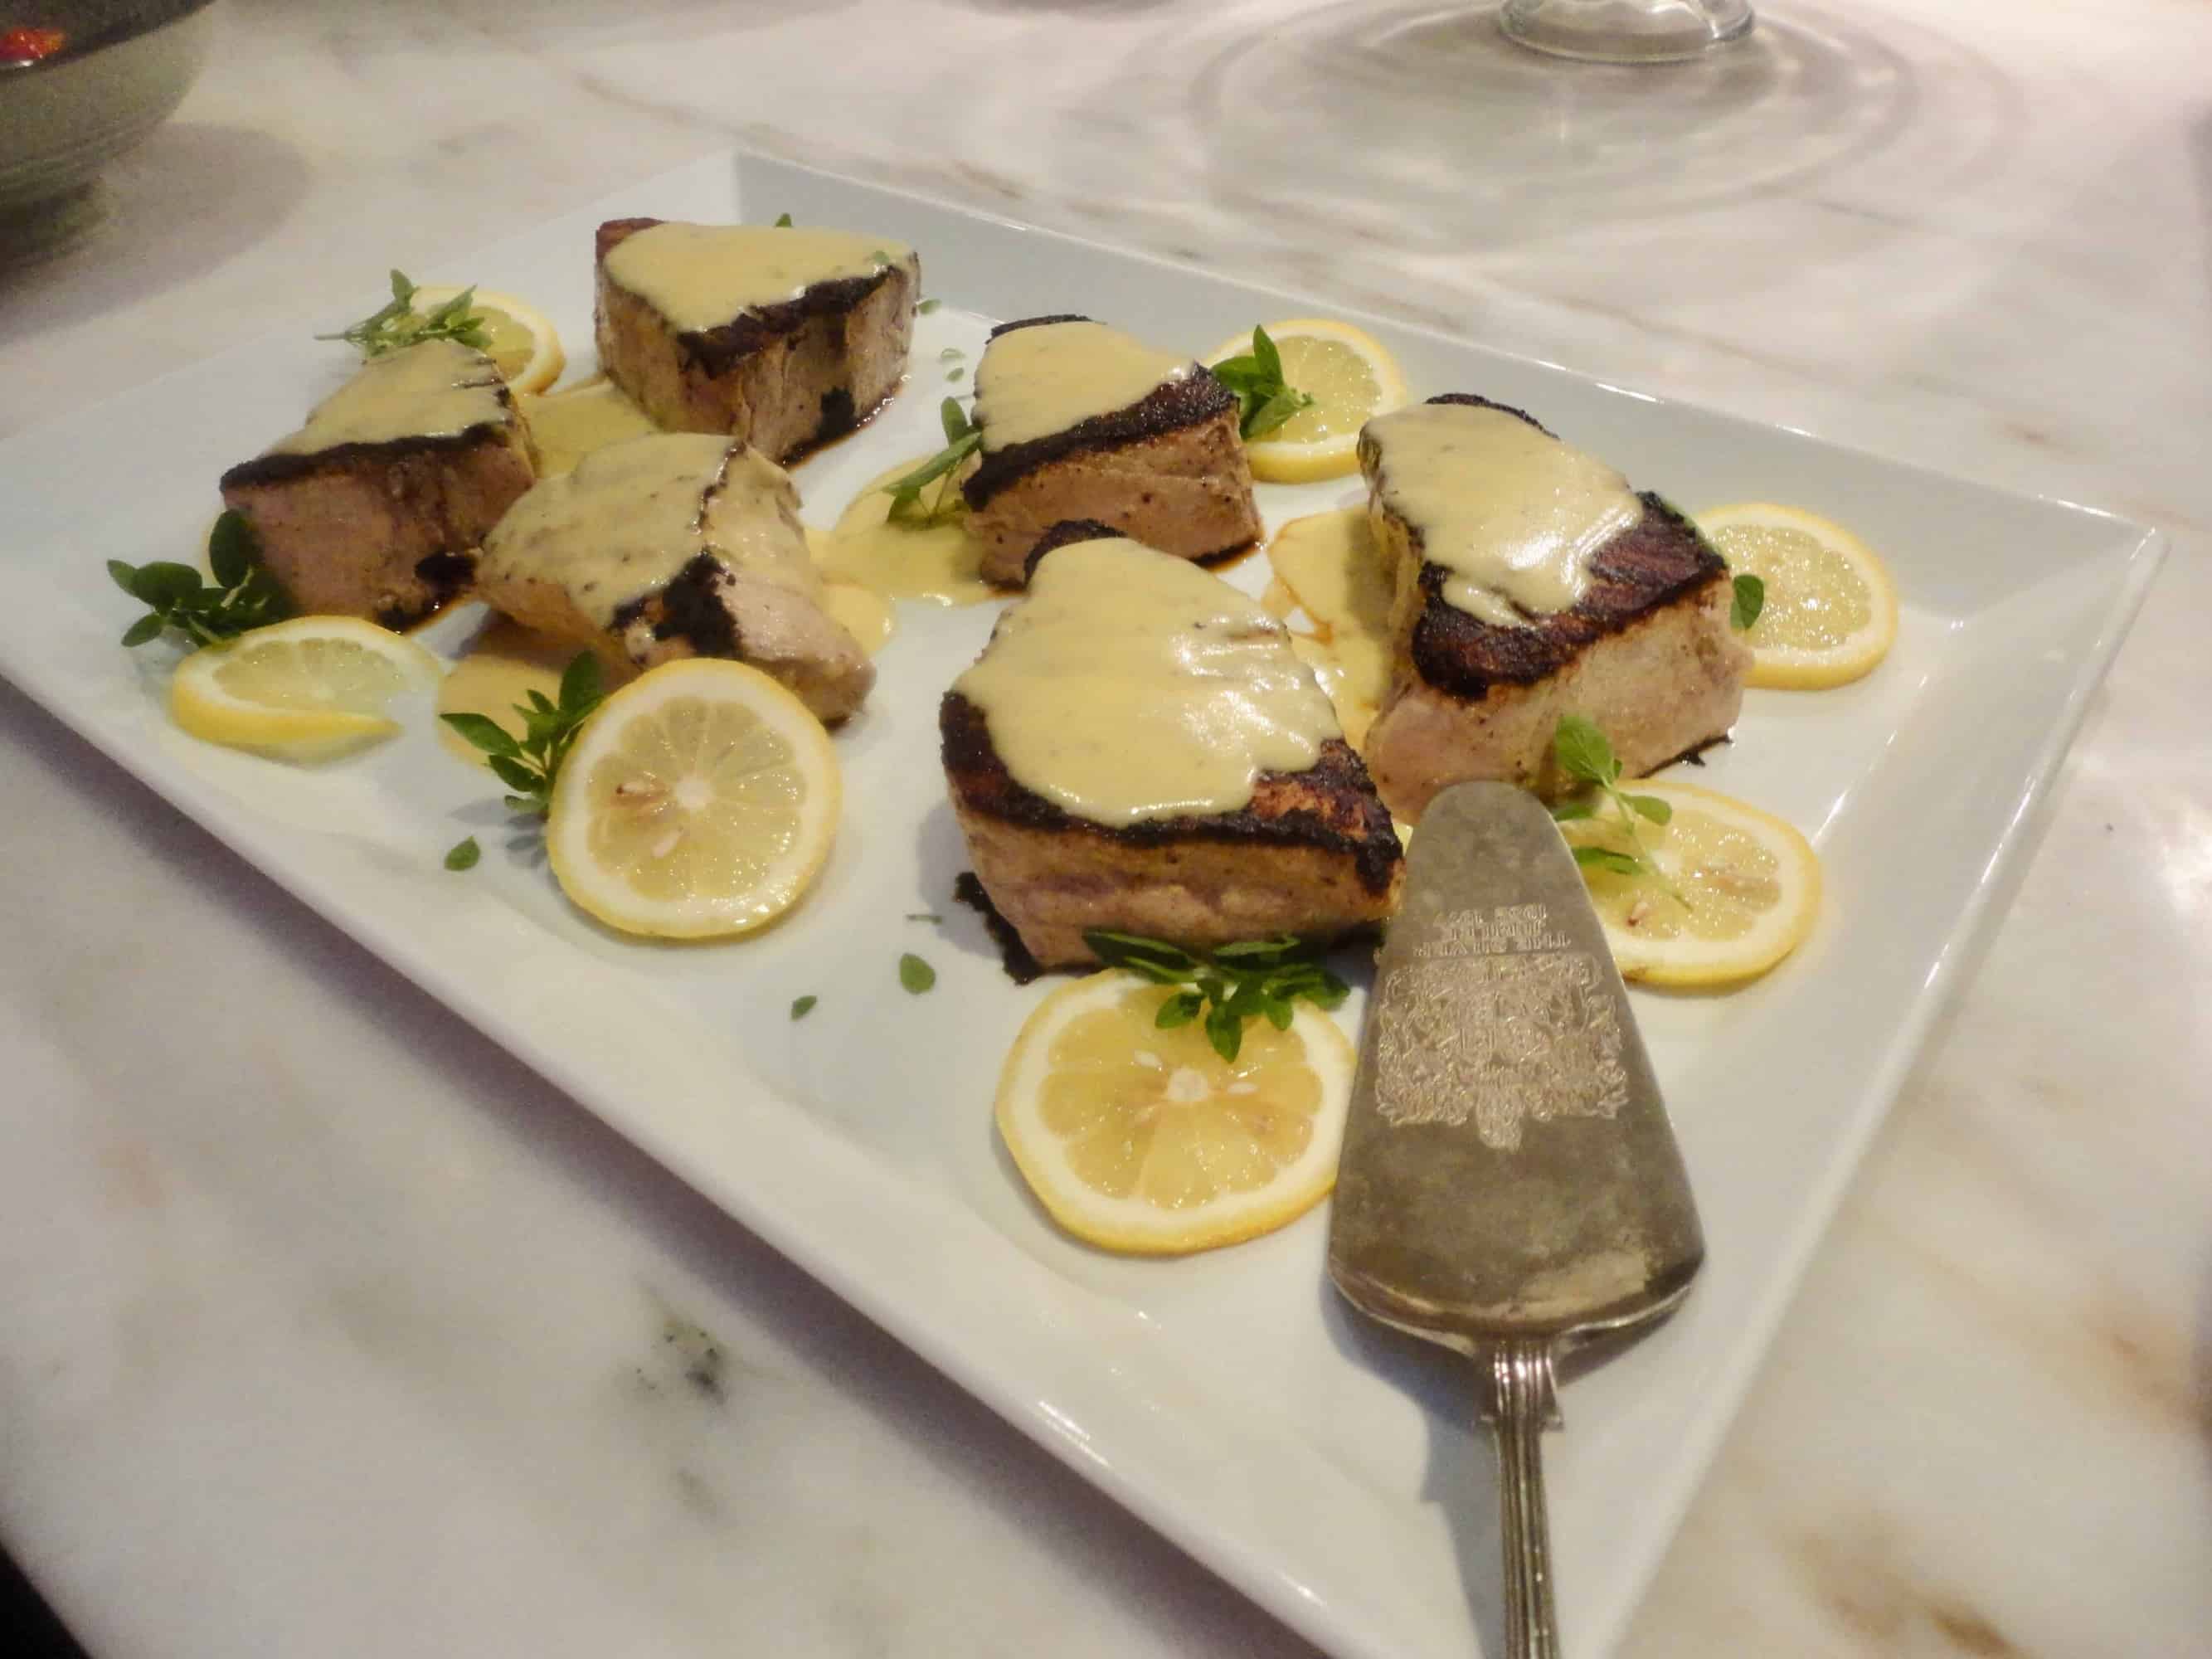 A salute to Anna Pump and her recipe for Grilled Fresh Tuna Steaks with Lemon Sauce